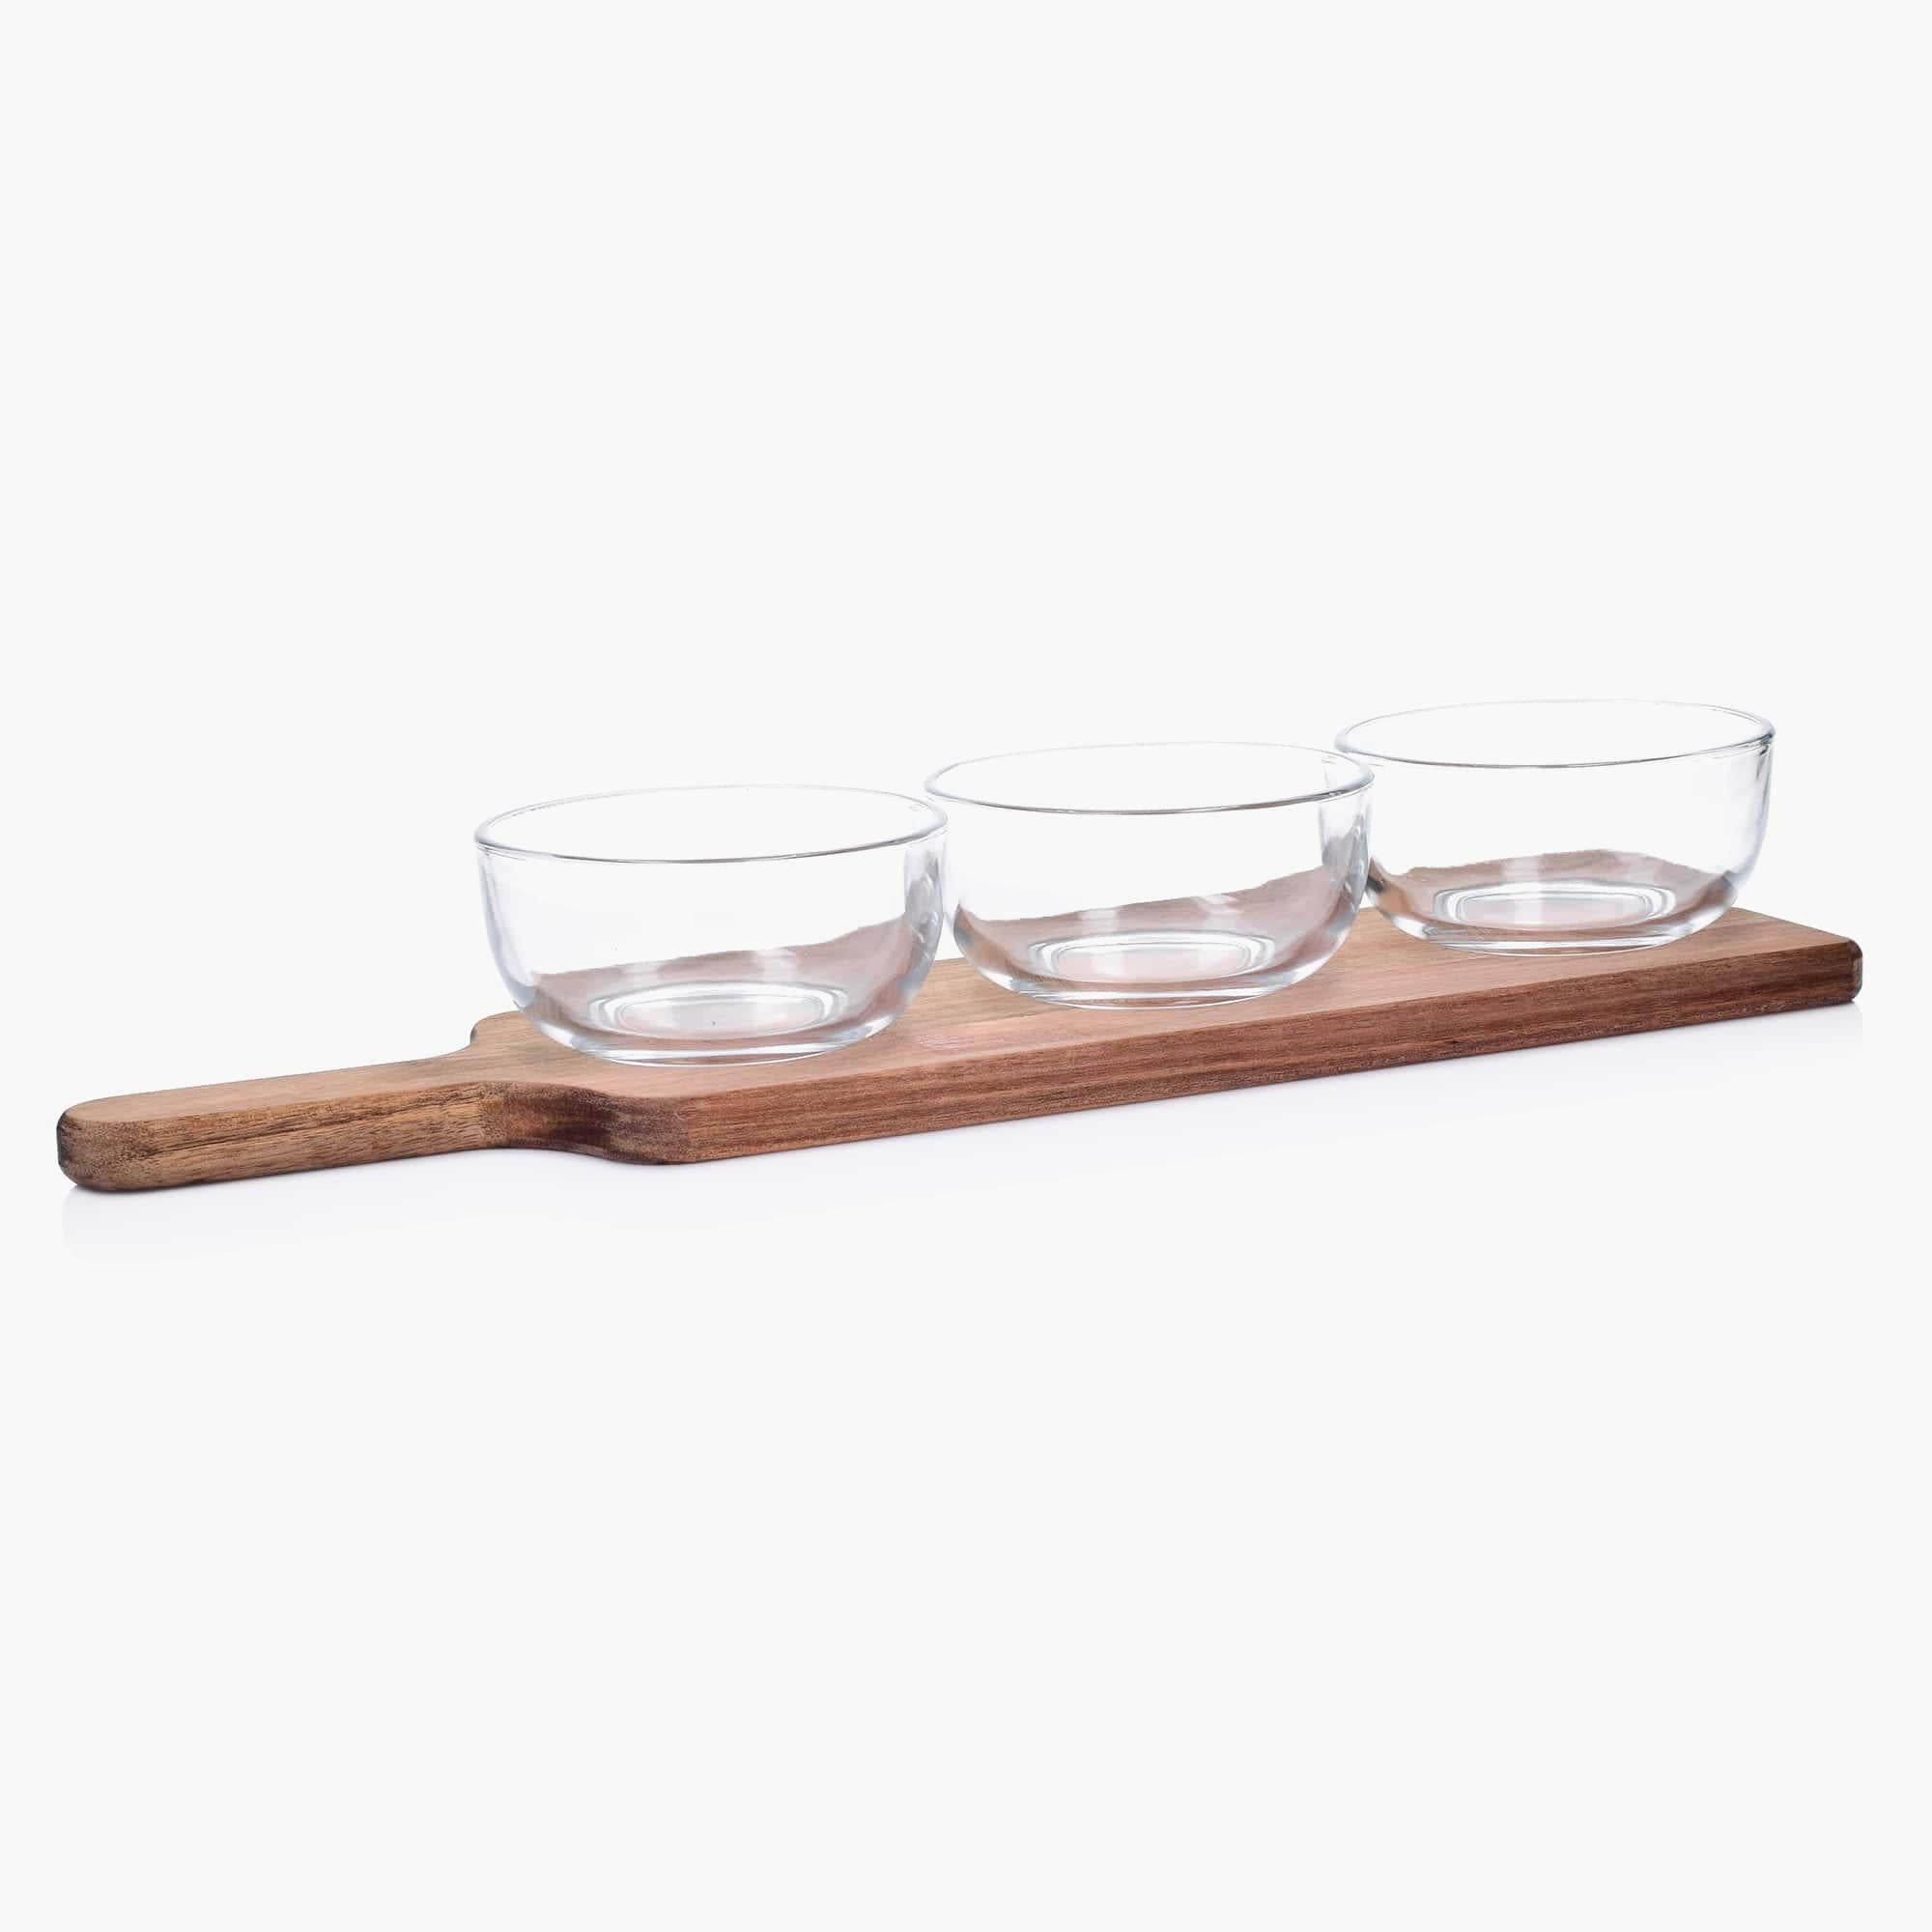 Wooden Flight Tray Paddle Set with Condiment Serving Bowls